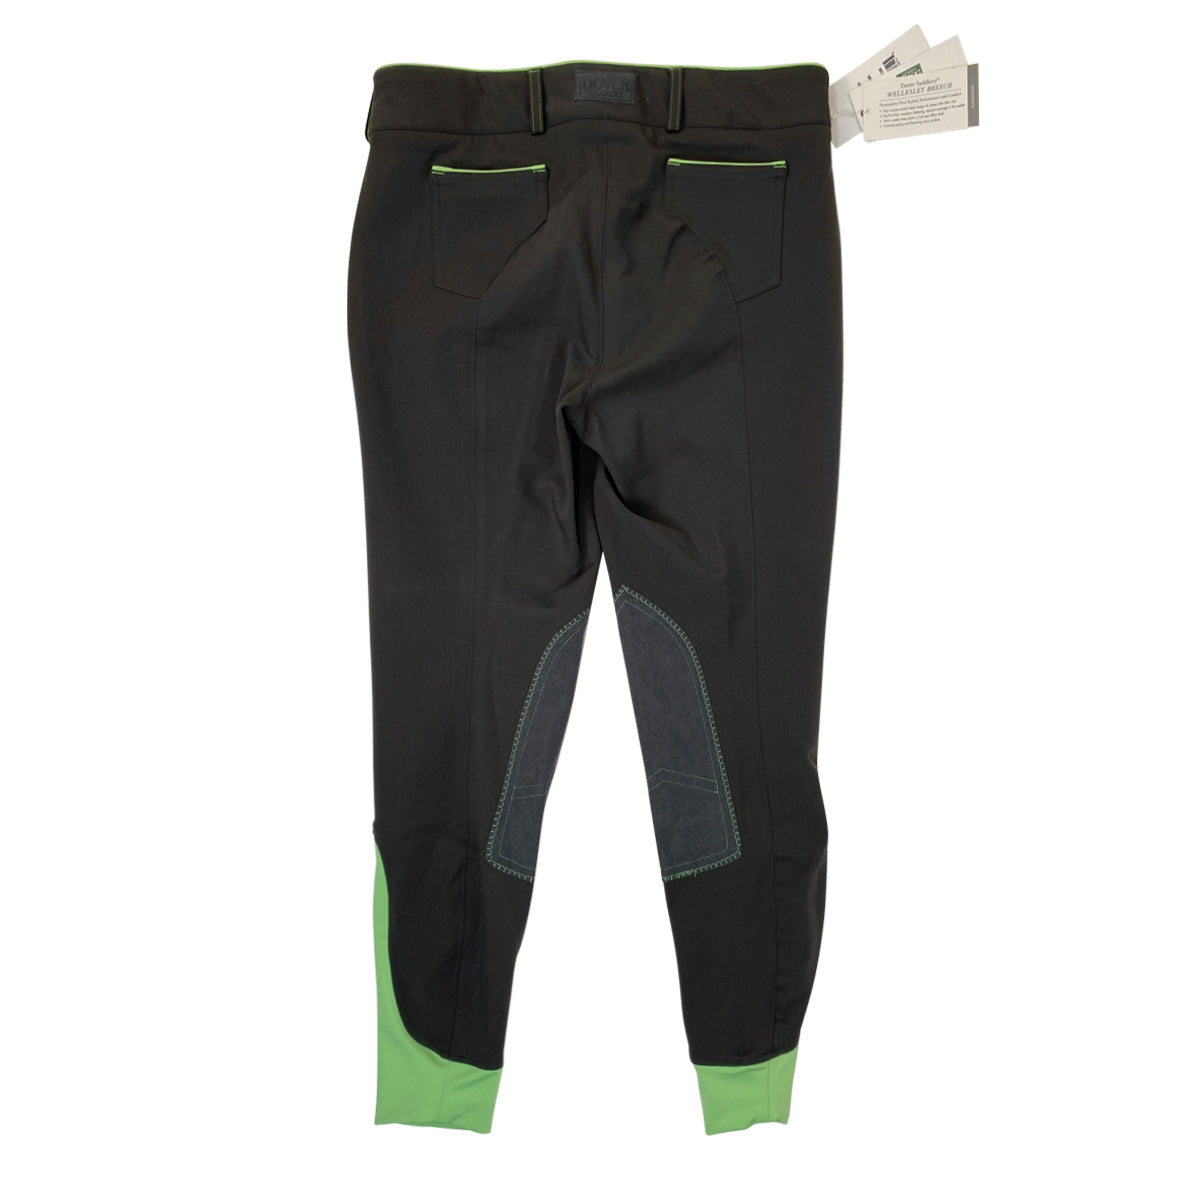 Dover Saddlery 'Wellesley' Breech in Charcoal/Sprout Green